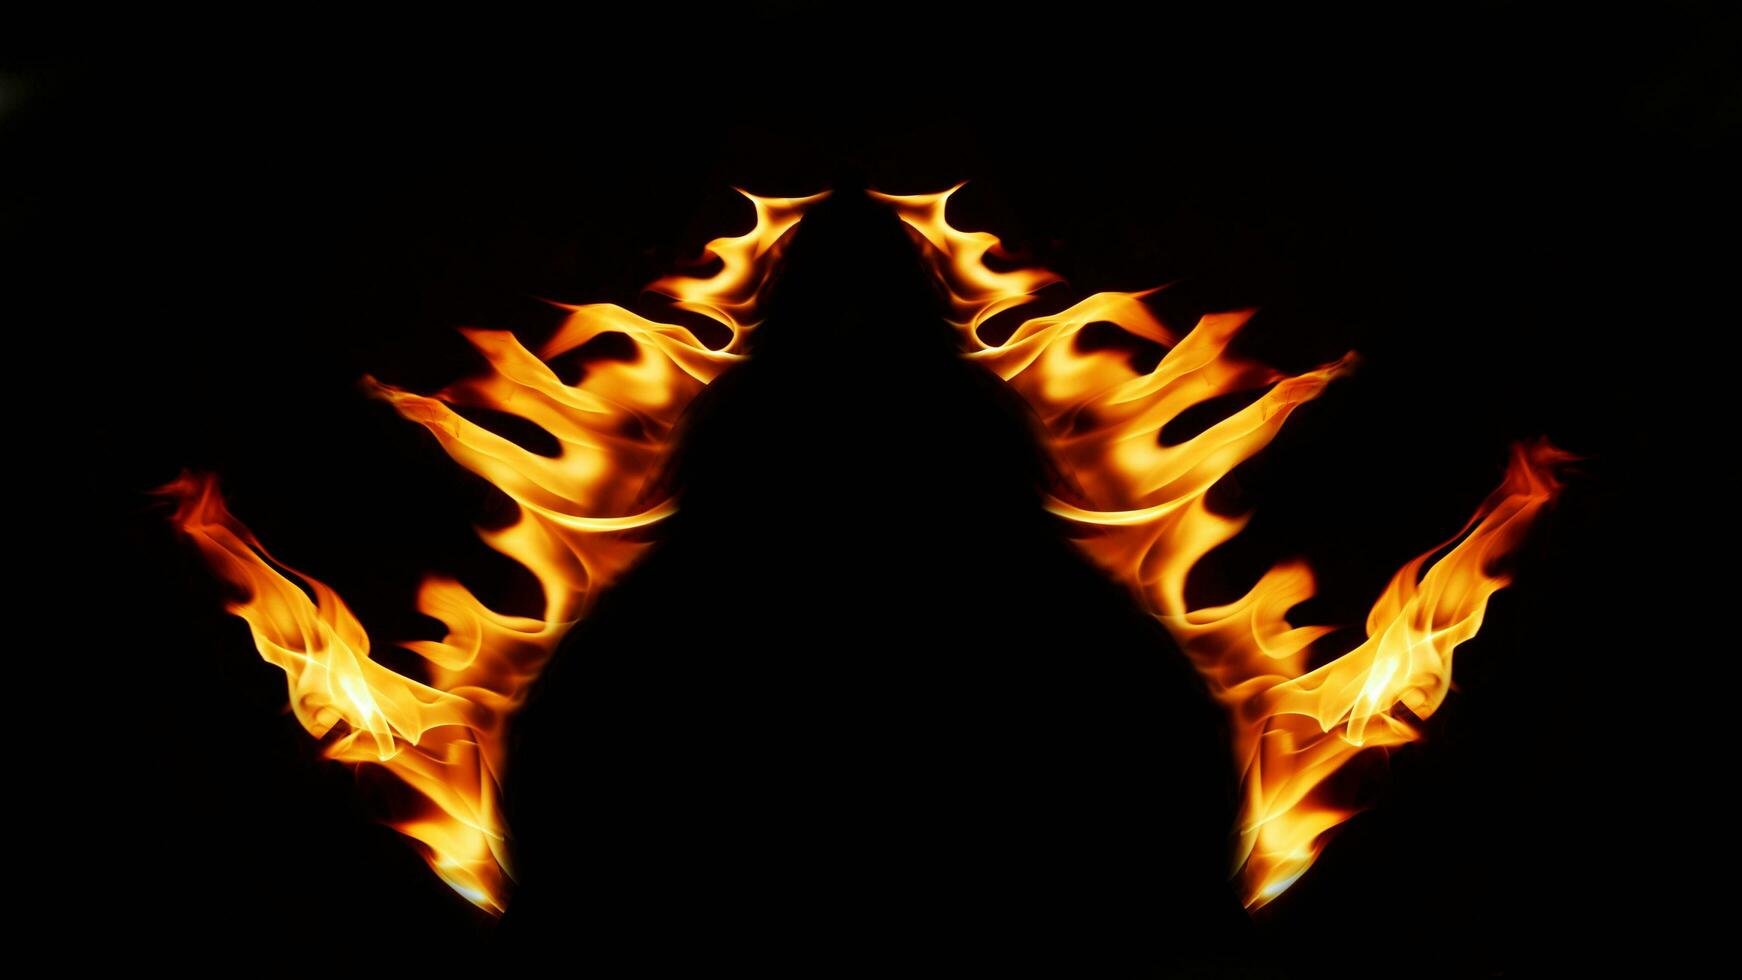 A beautiful flame shaped as imagined. like from hell, showing a dangerous and fiery fervor, black background. photo